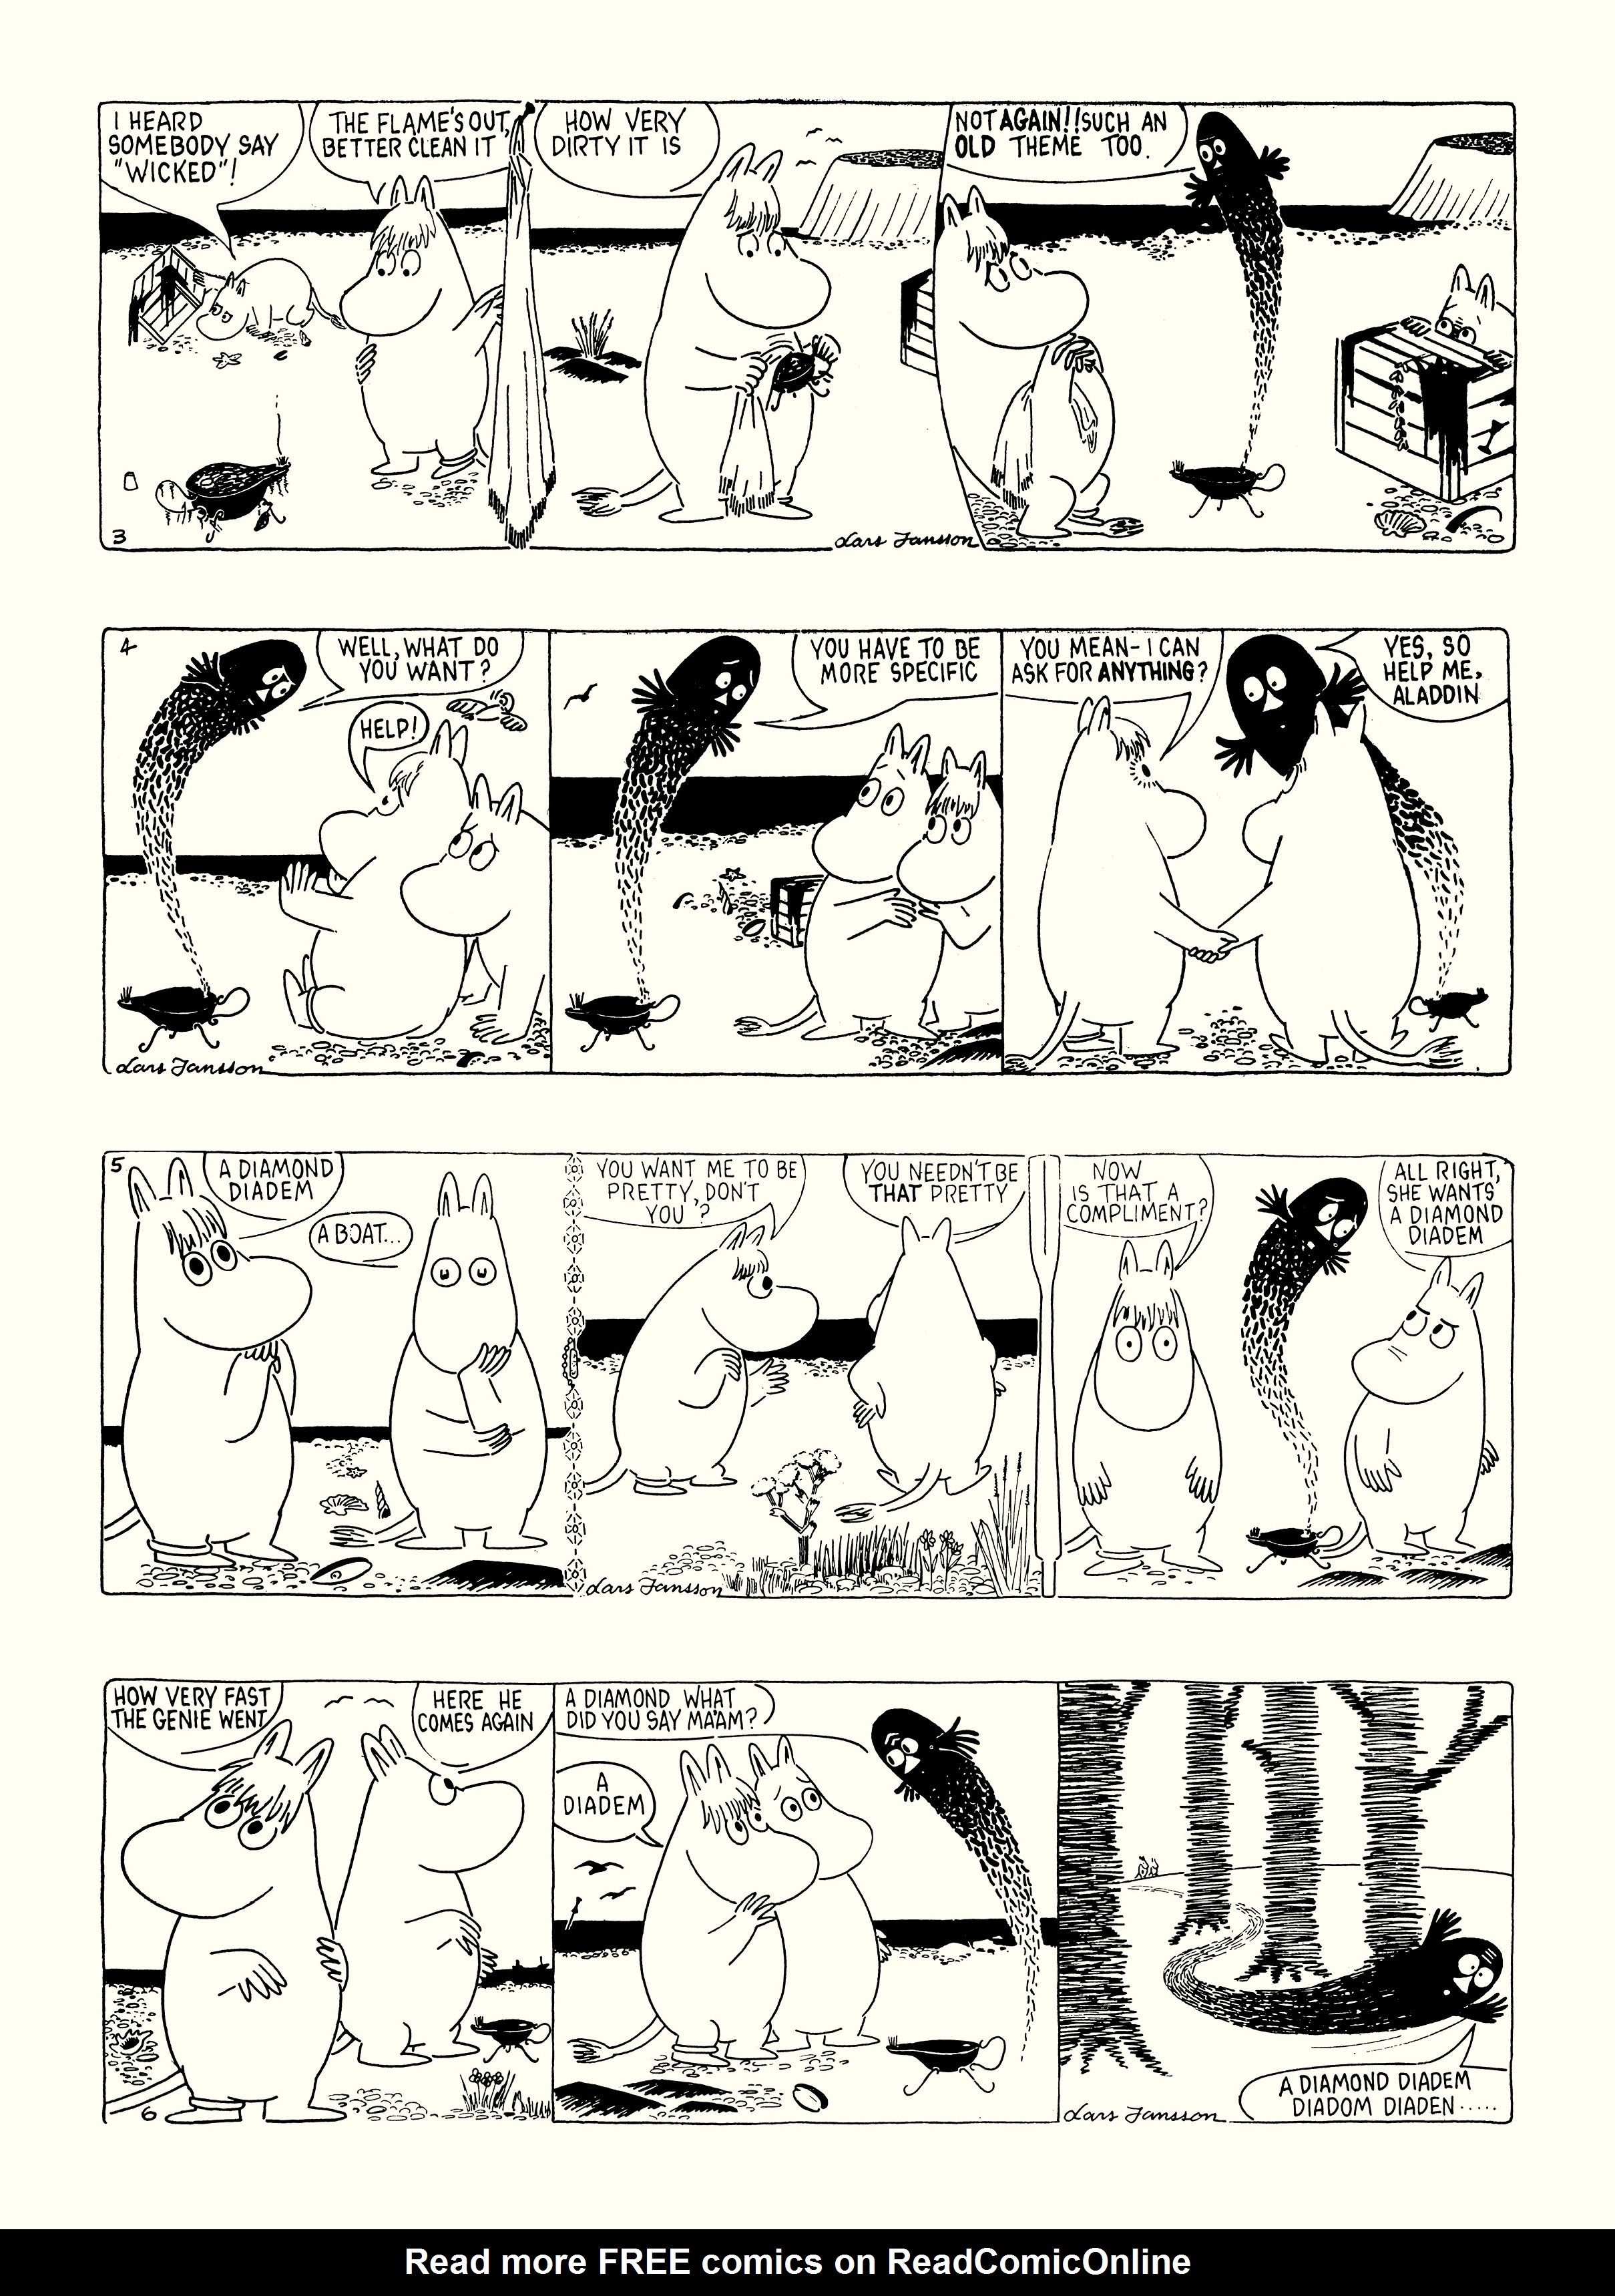 Read online Moomin: The Complete Lars Jansson Comic Strip comic -  Issue # TPB 6 - 7